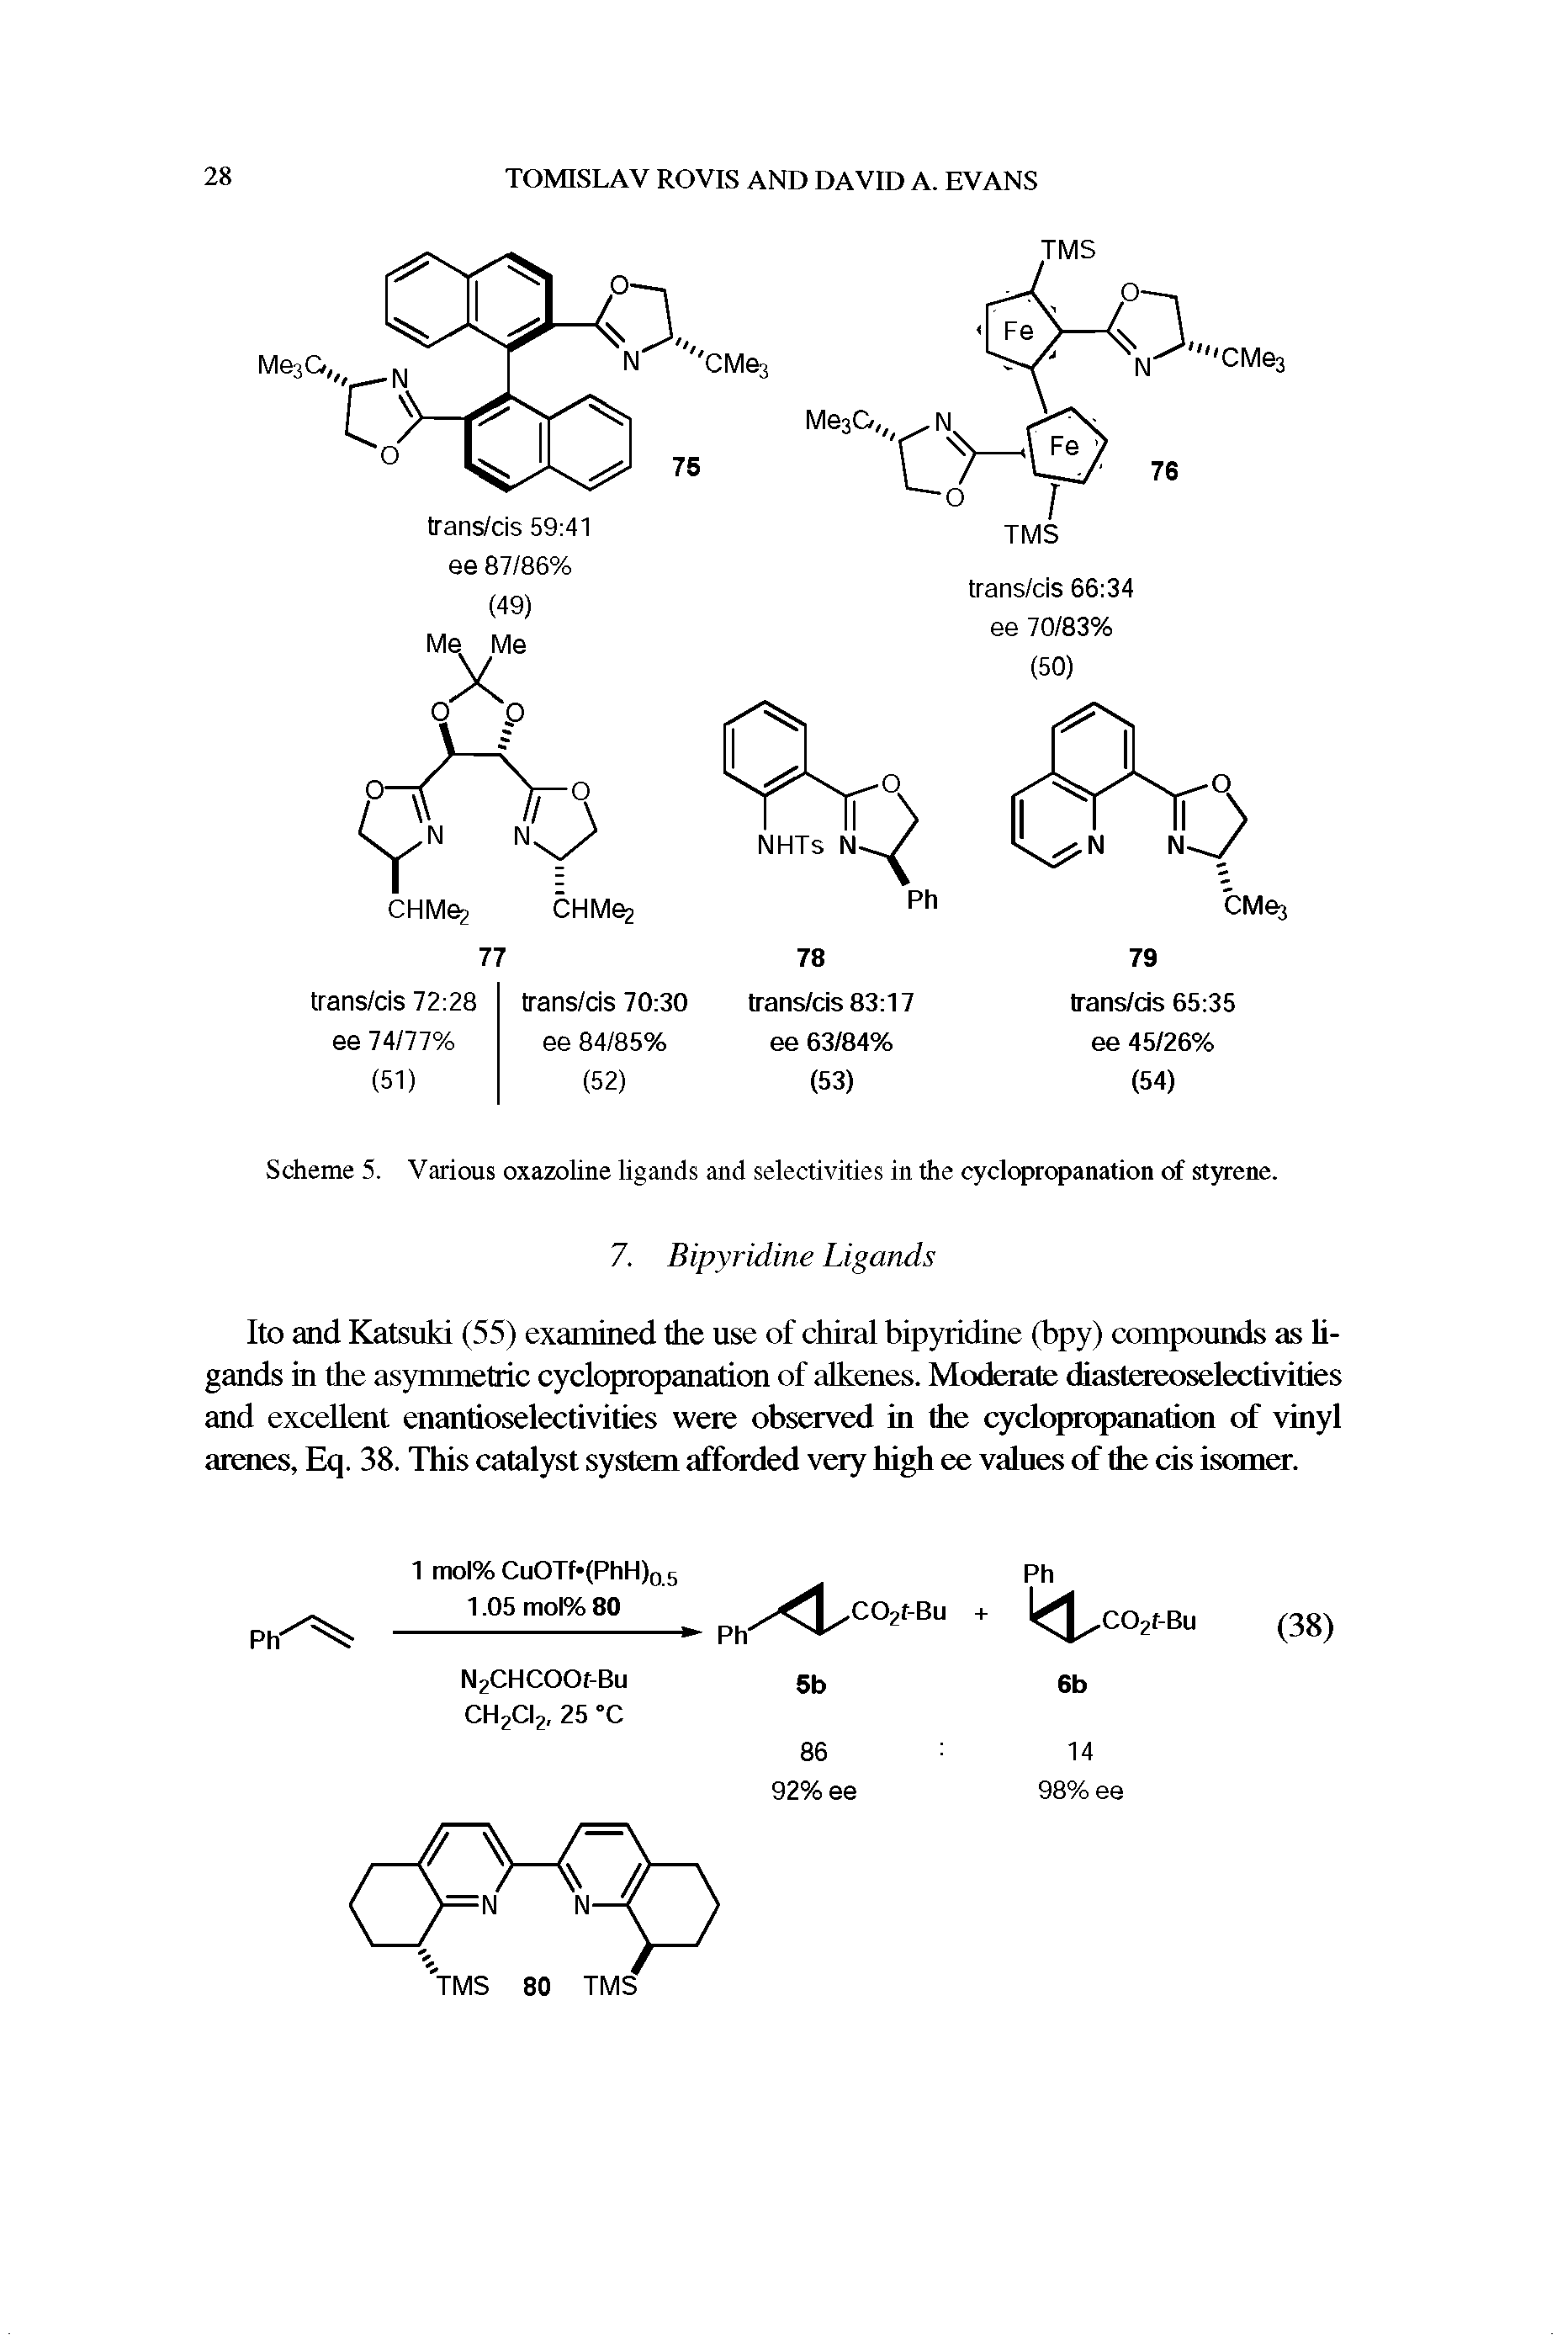 Scheme 5. Various oxazoline ligands and selectivities in the cyclopropanation of styrene.